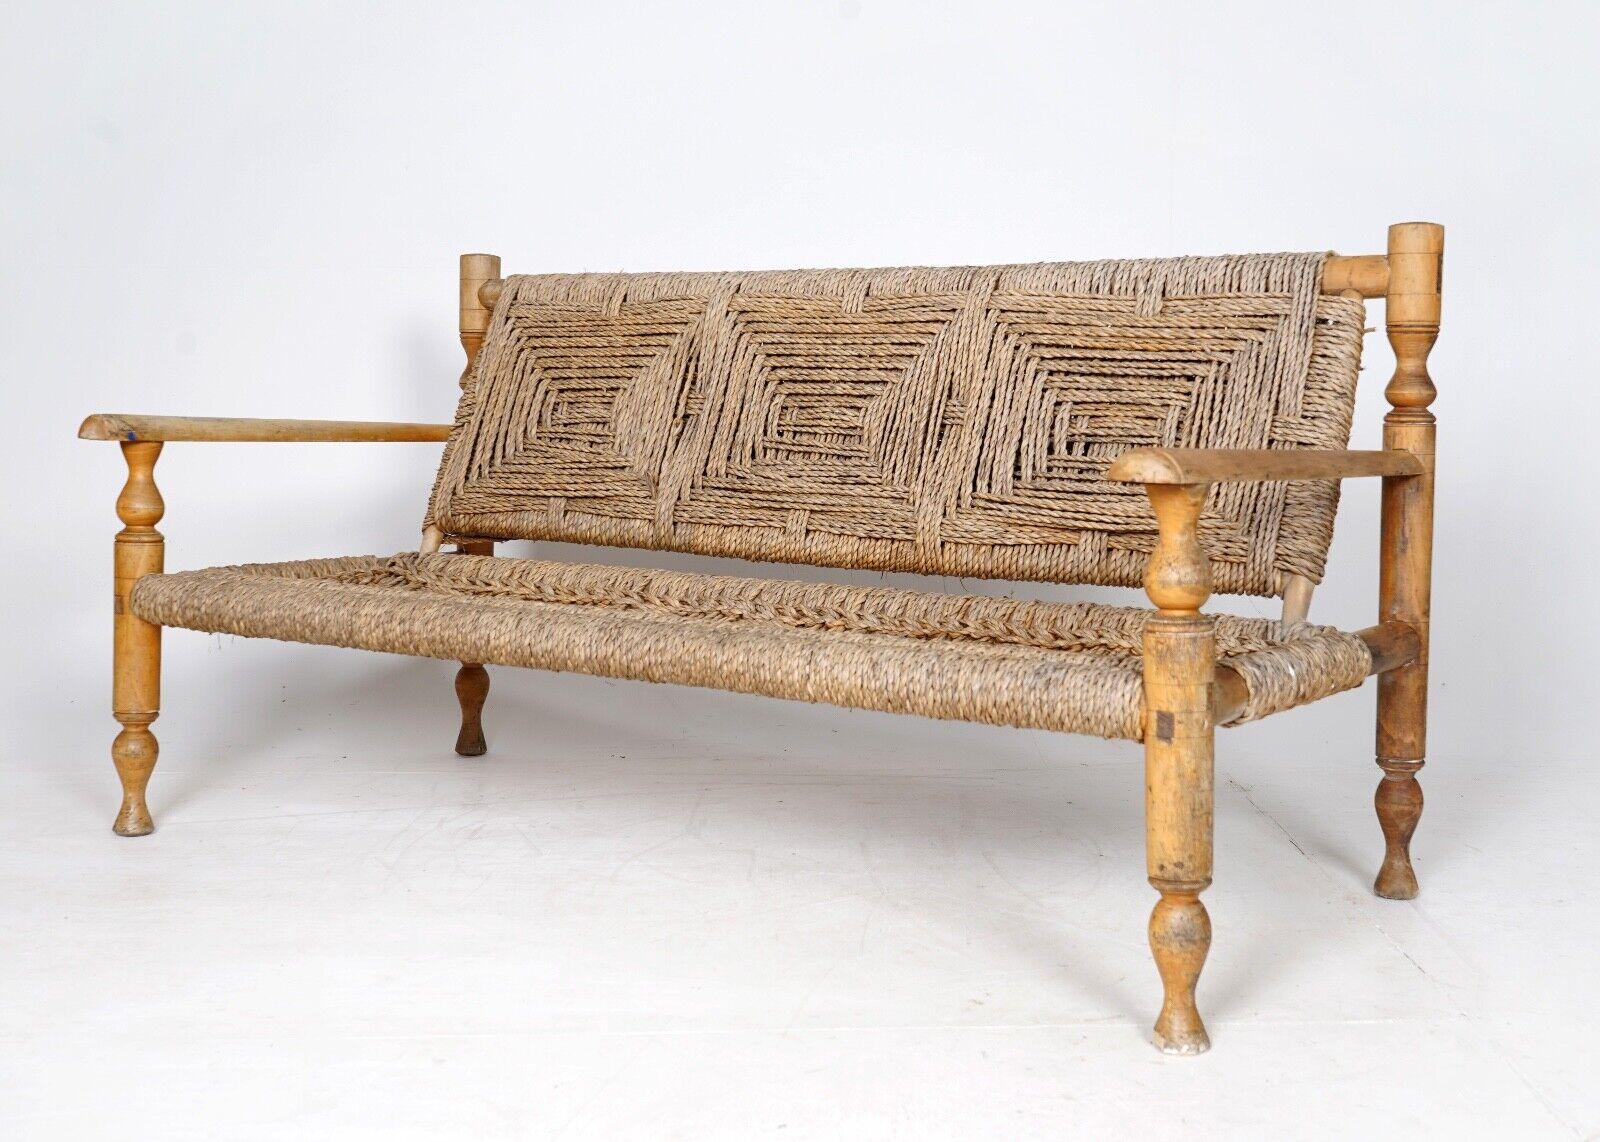 1950's French Bench by Adrien Audoux and Frida Minnet - Hemp Rope Seat  5